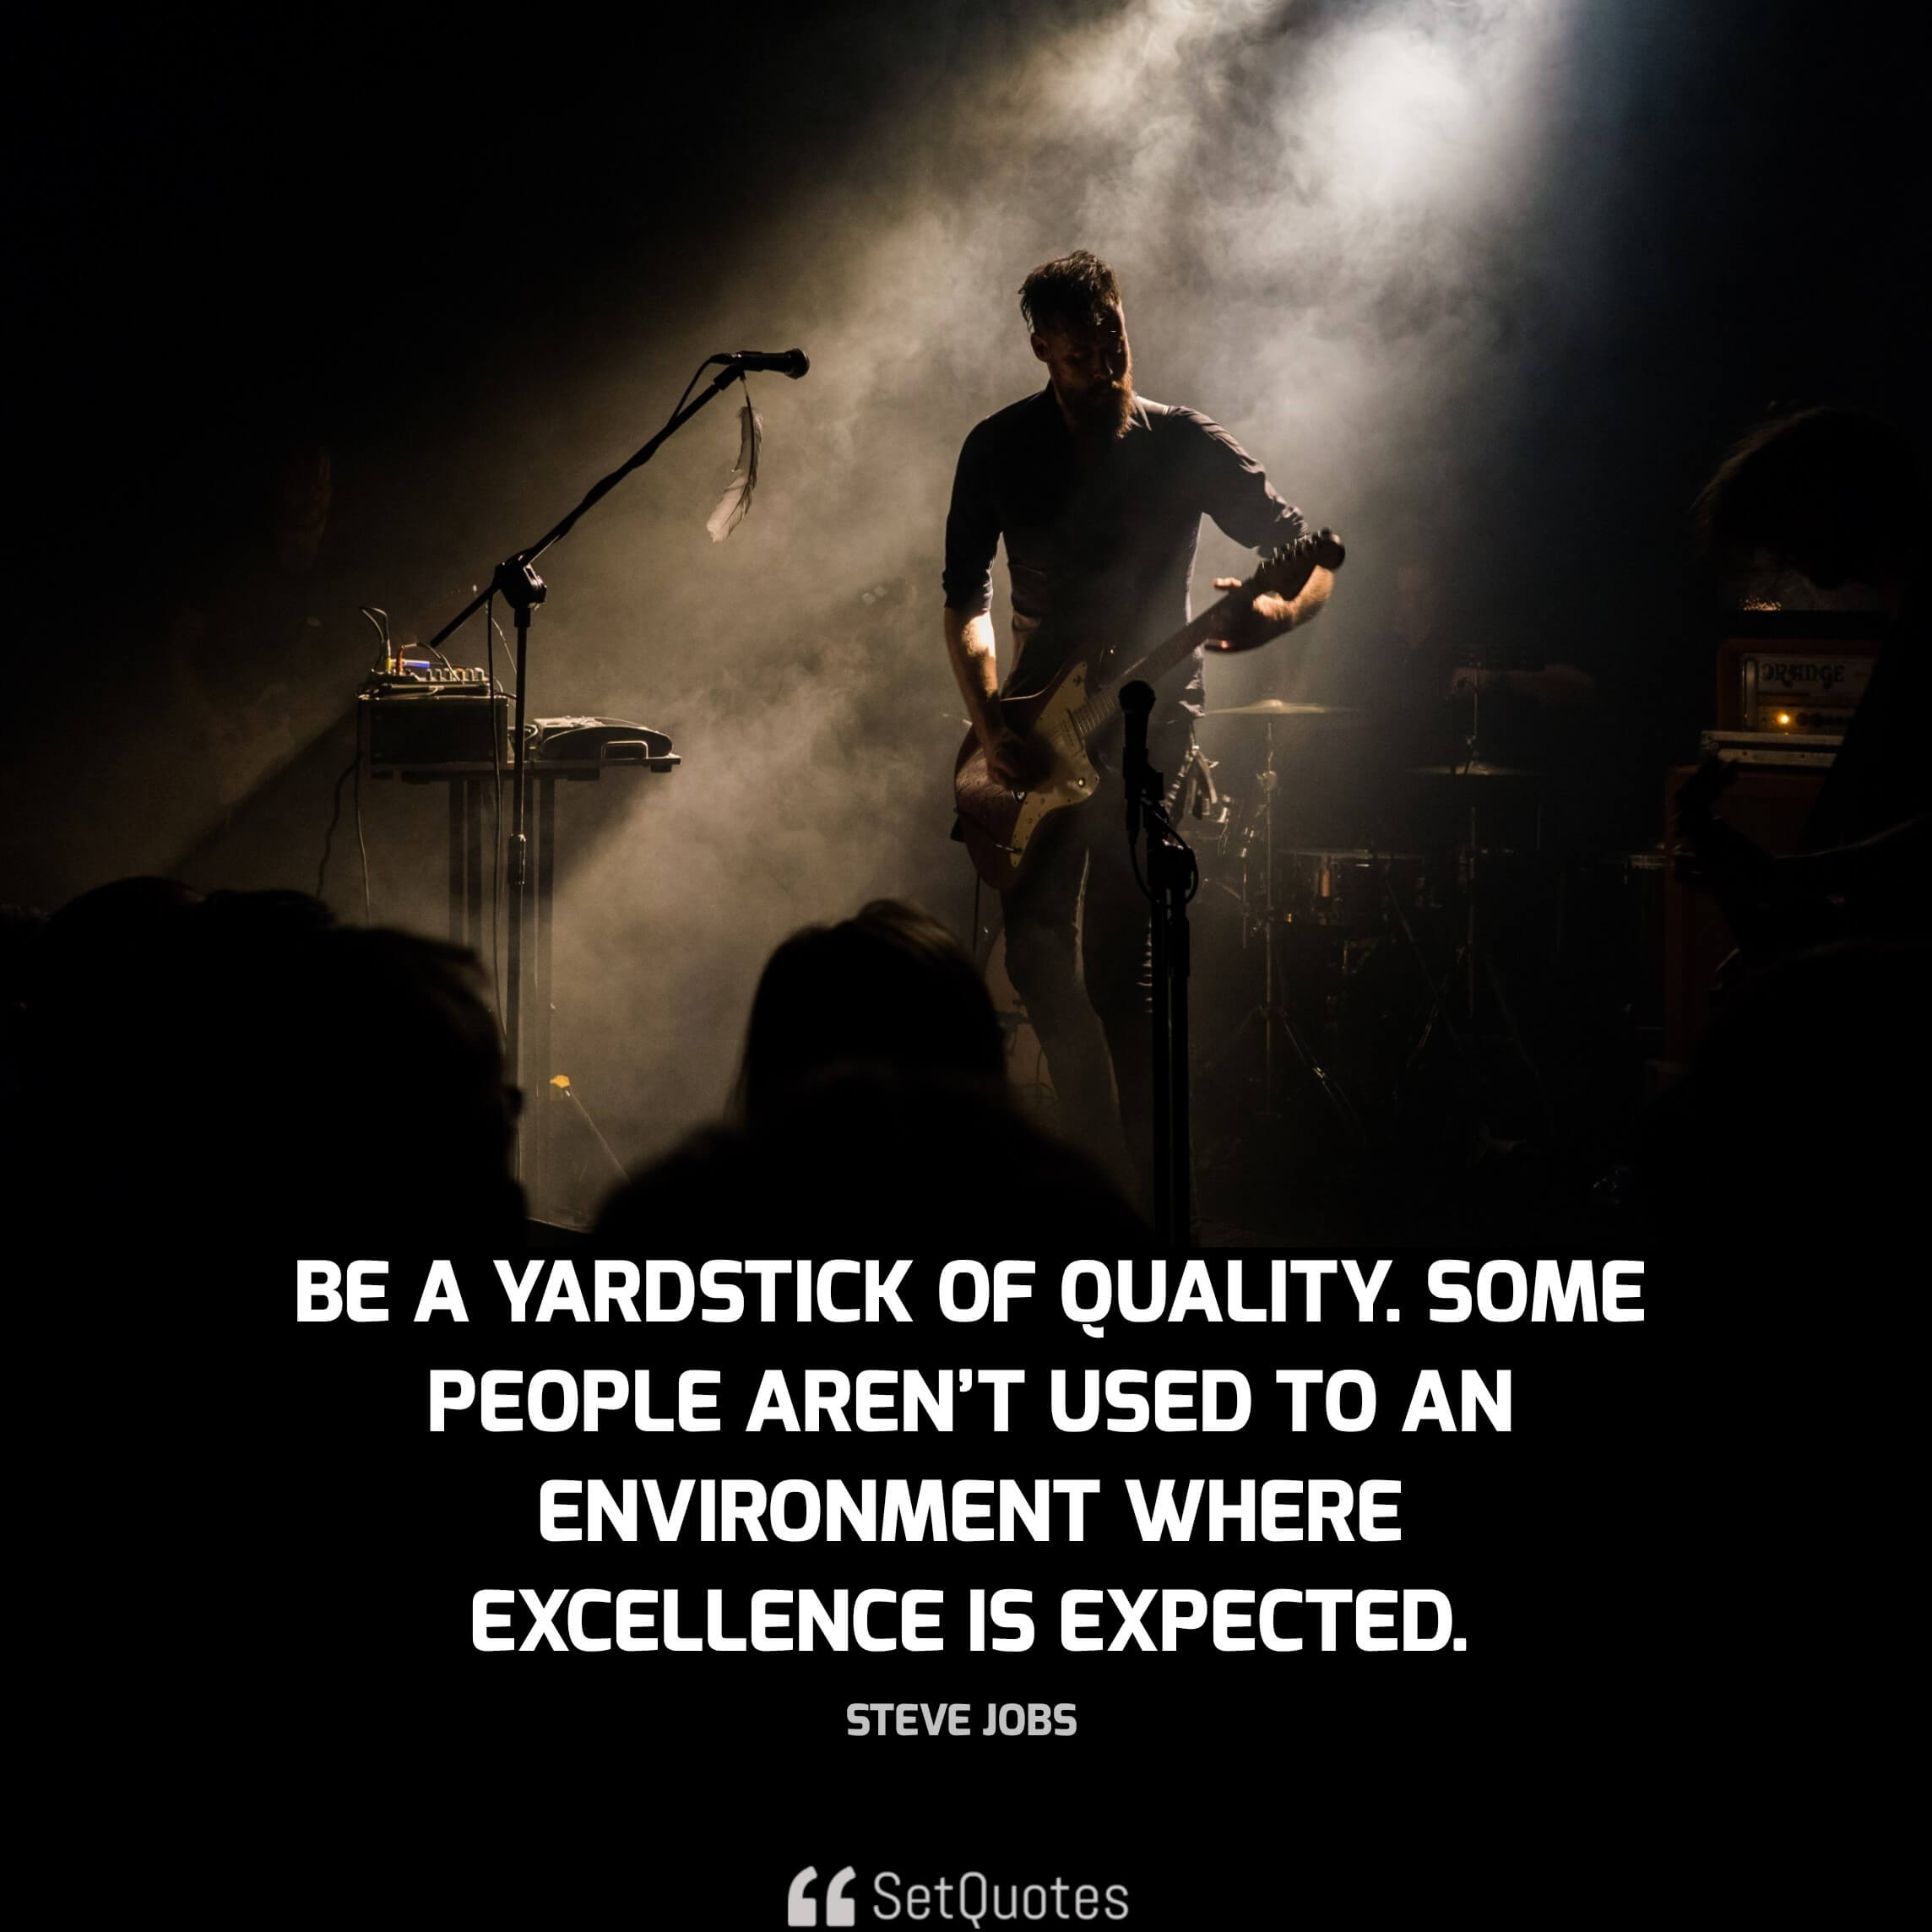 Be a yardstick of quality. Some people aren’t used to an environment where excellence is expected. - steve jobs quotes